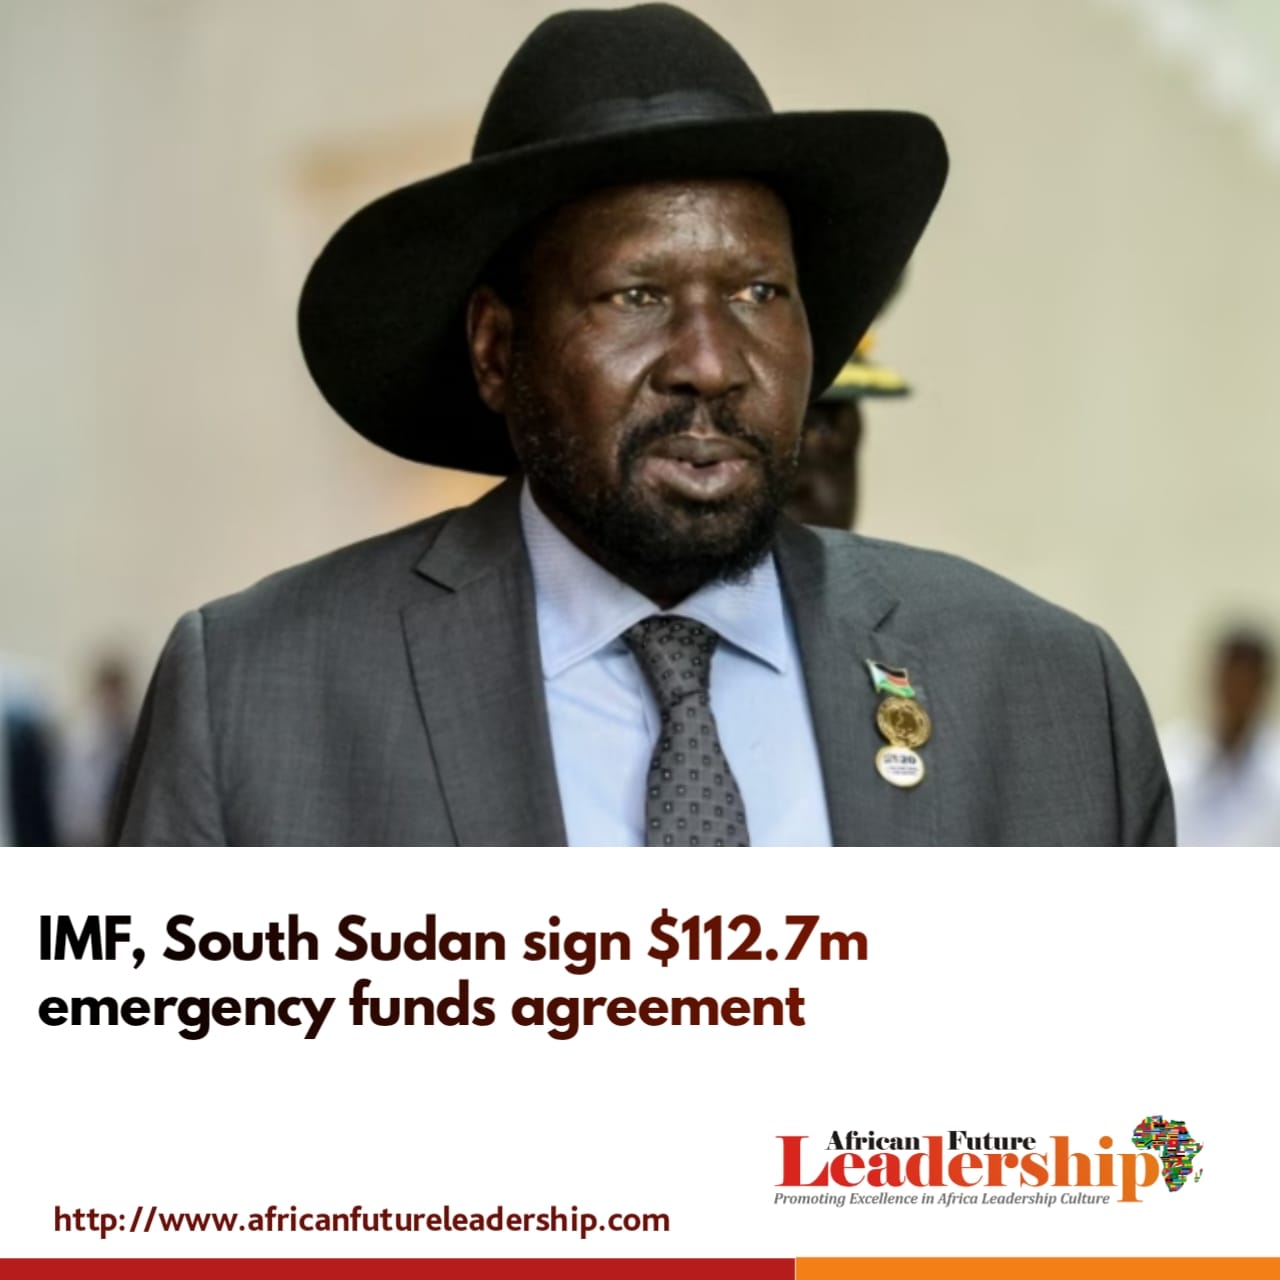 IMF, South Sudan sign $112.7m emergency funds agreement